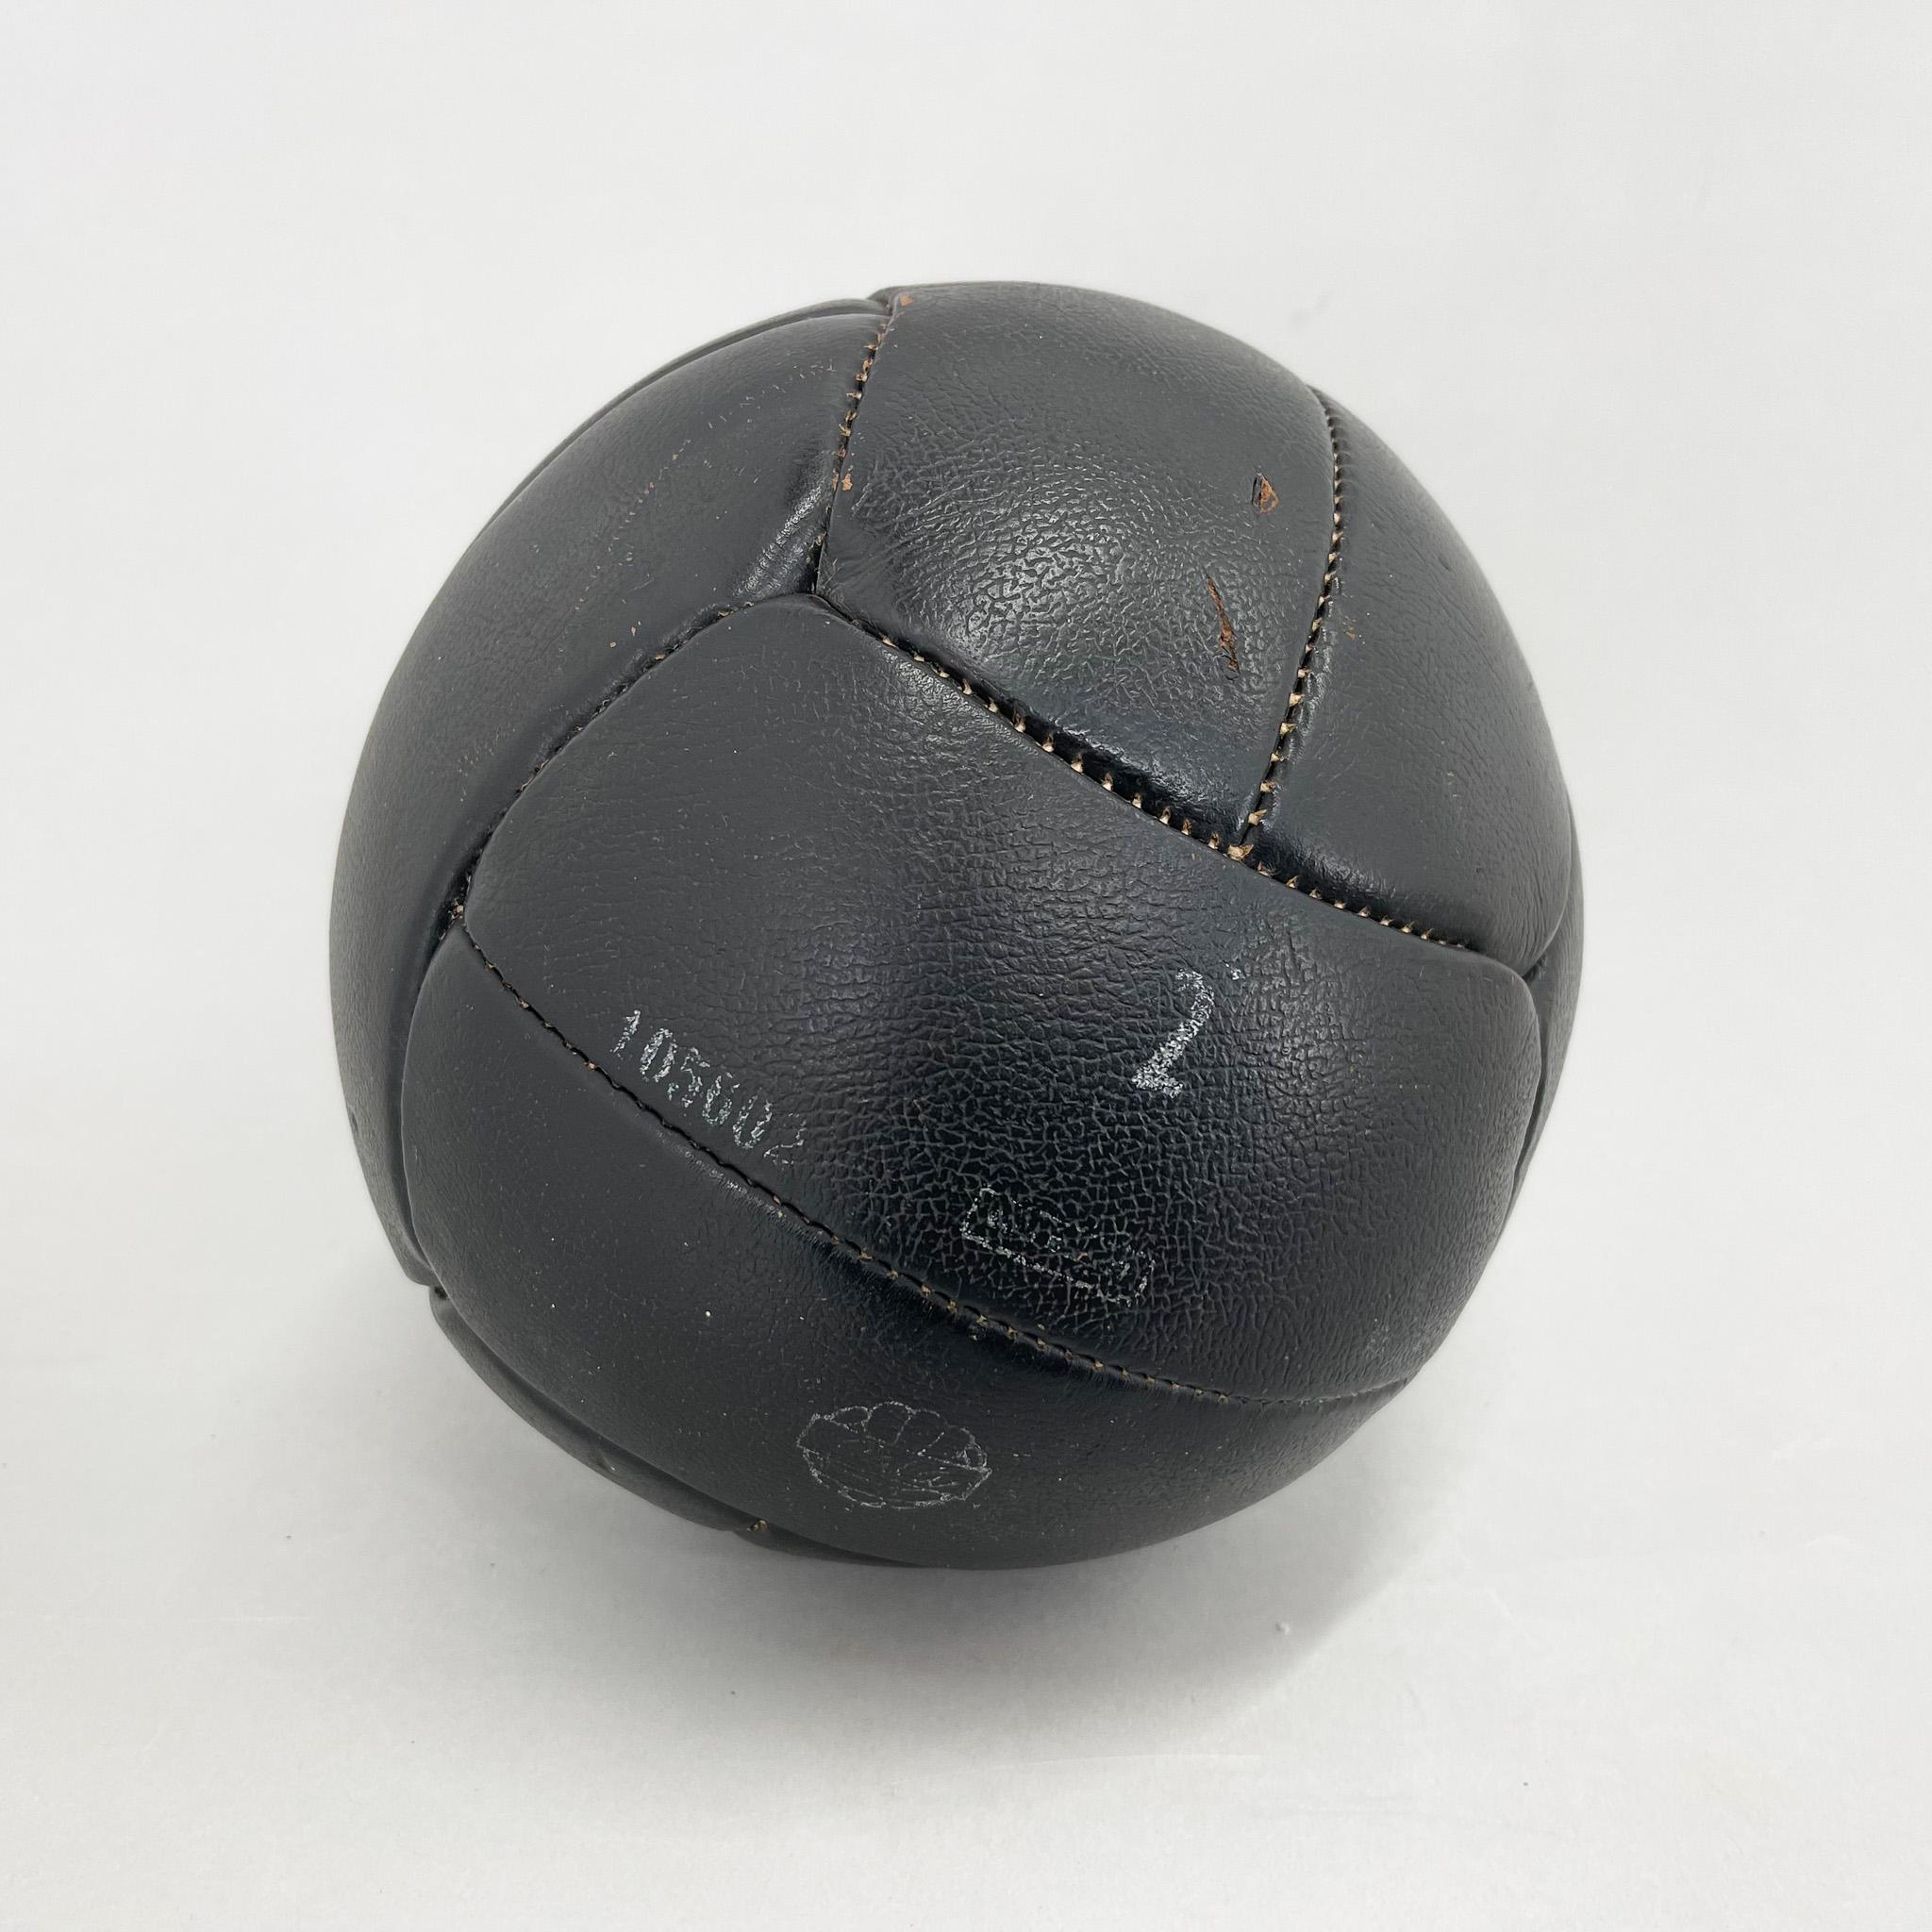 Czech Vintage Black Leather Medicine Ball by Gala, 1930s  For Sale